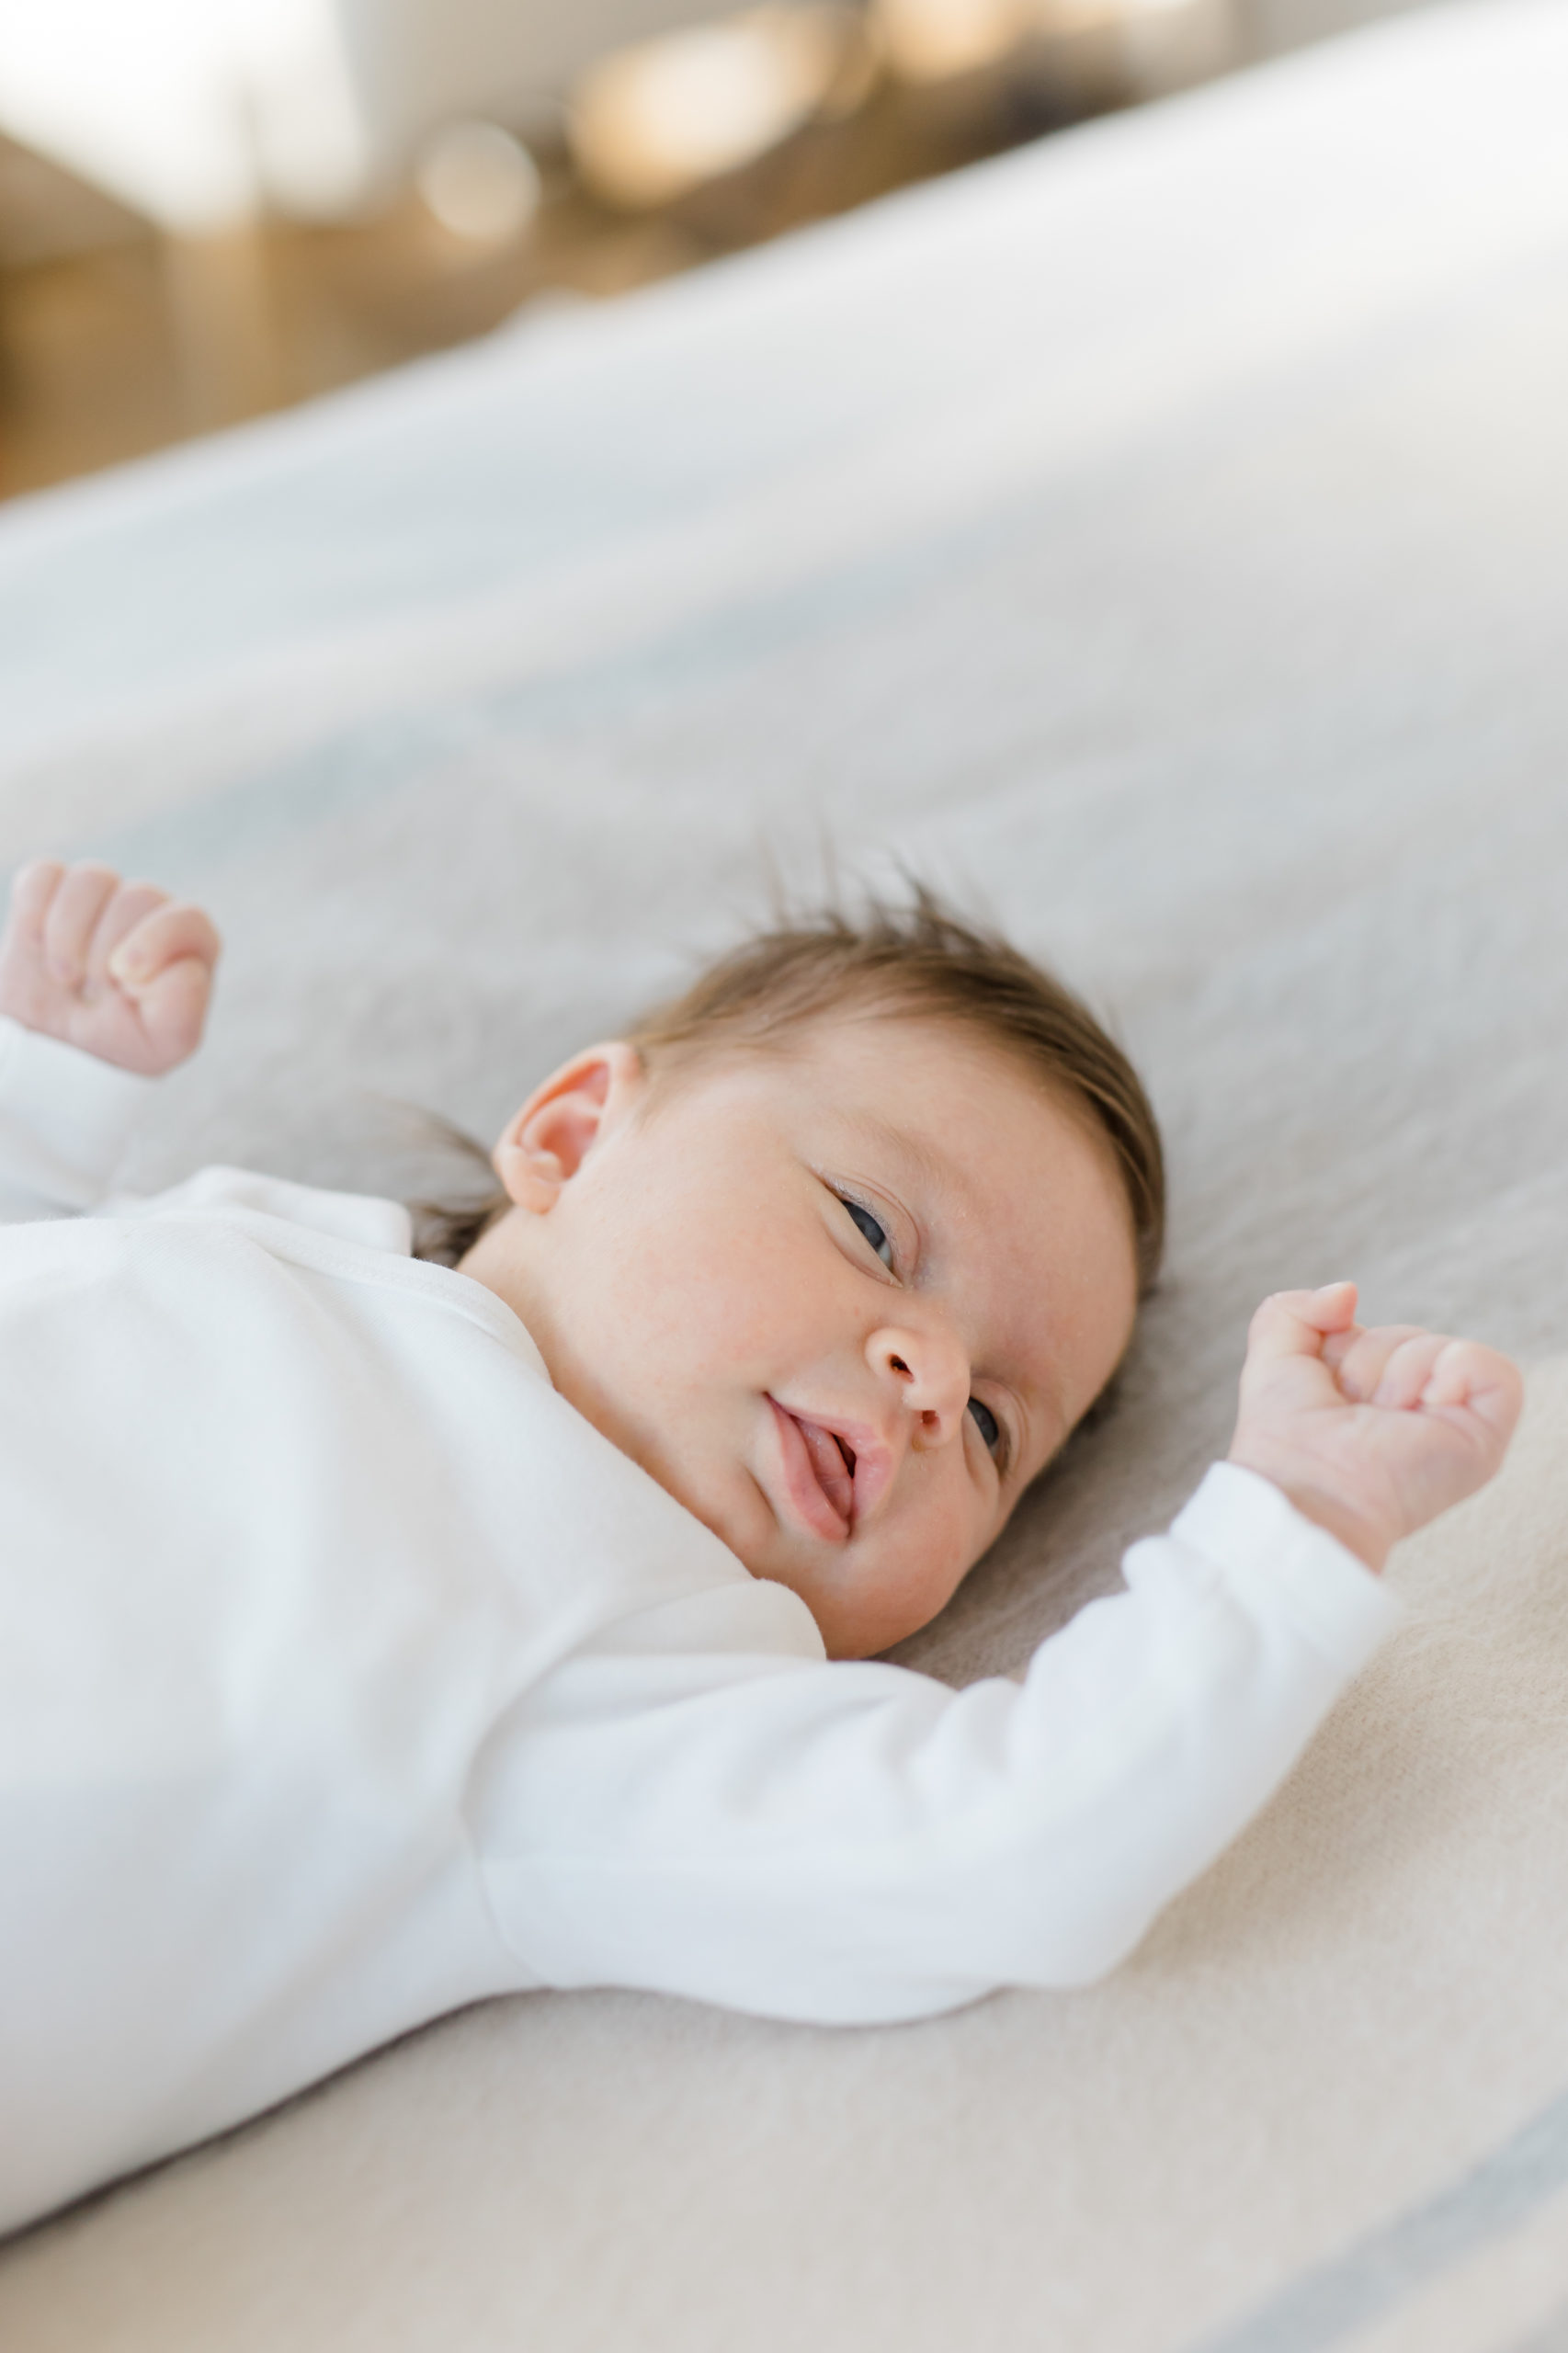 A close-up portrait of a baby on a bed at an in home newborn photography session in NYC photographed by Jacqueline Clair Photography. 